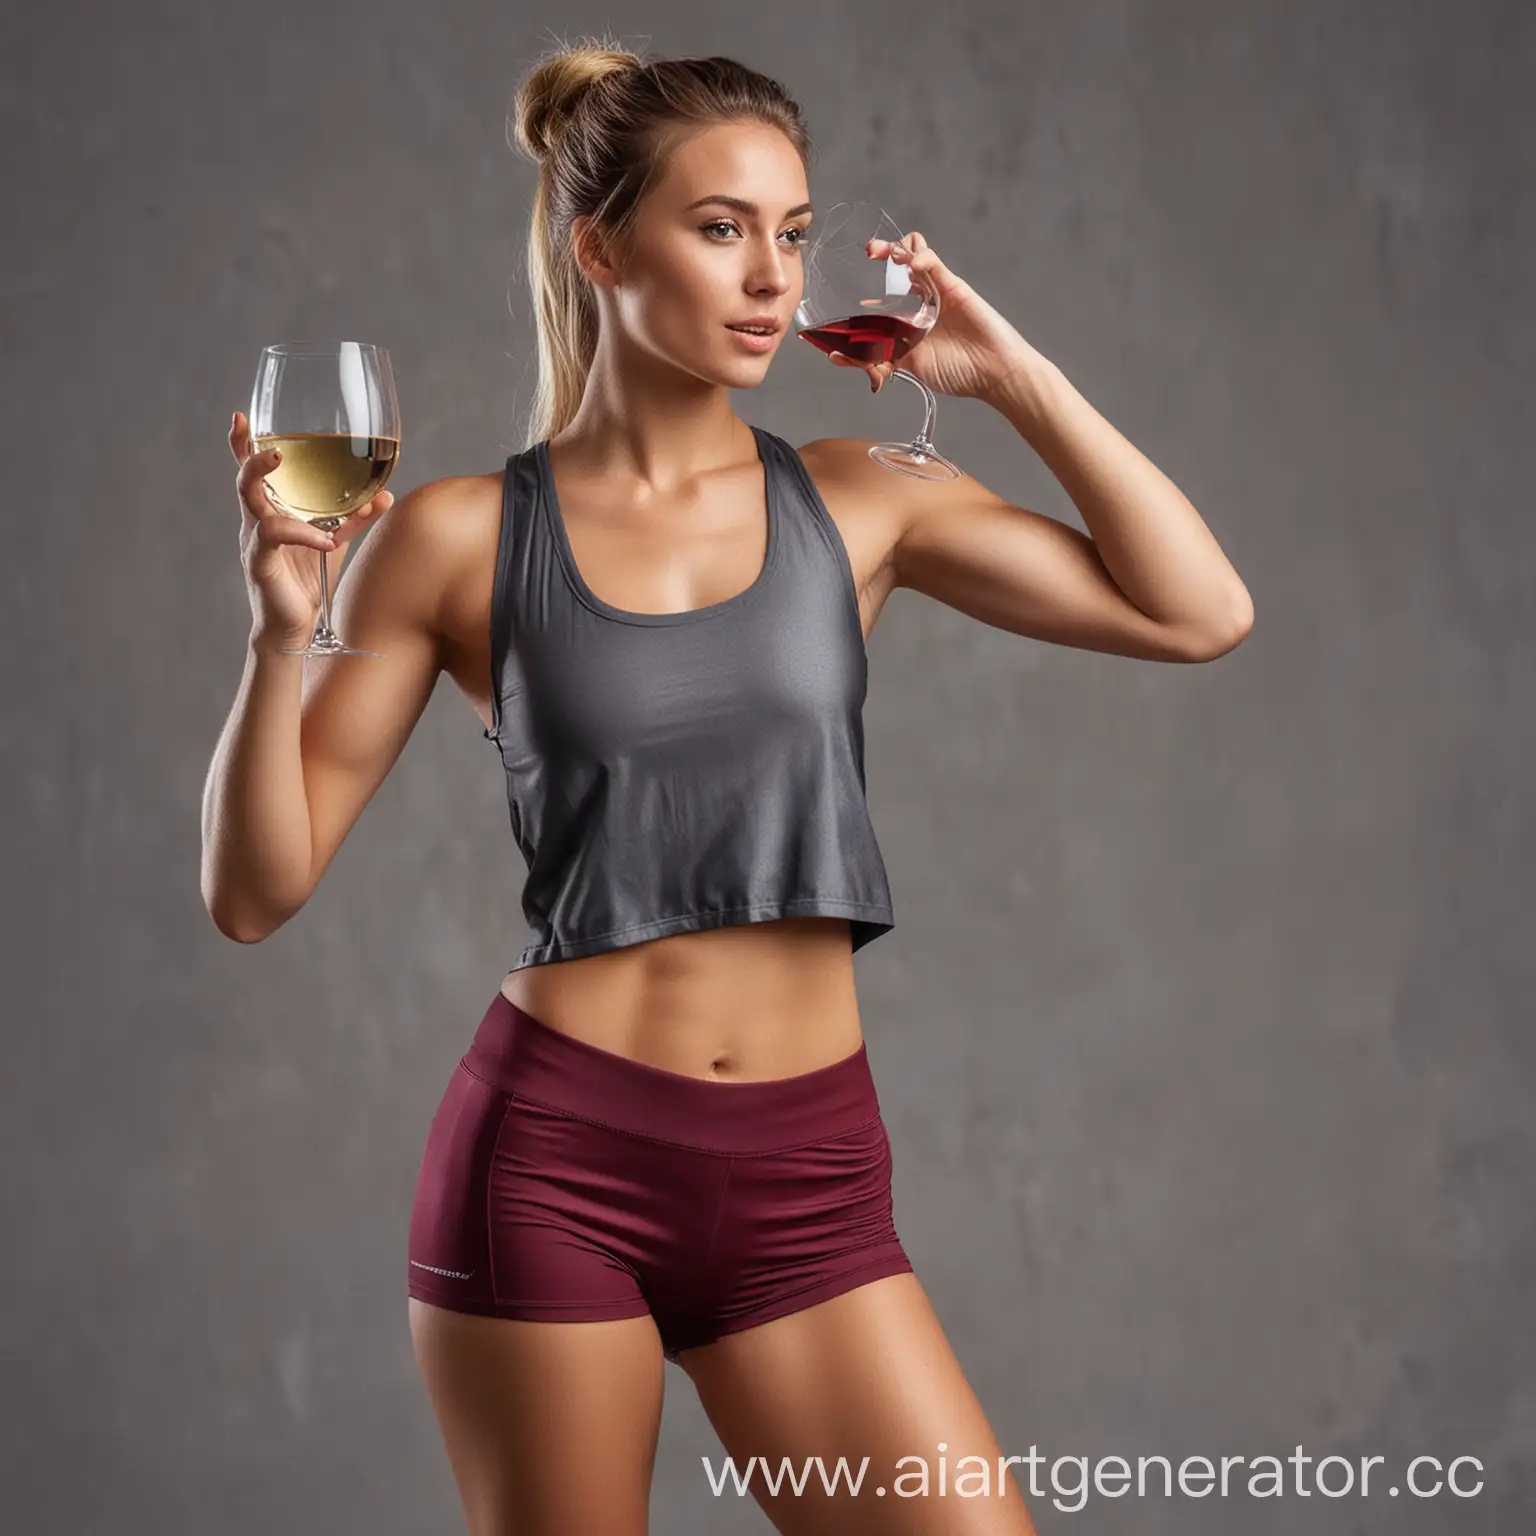 A girl athlete in a sporty style with a glass of wine